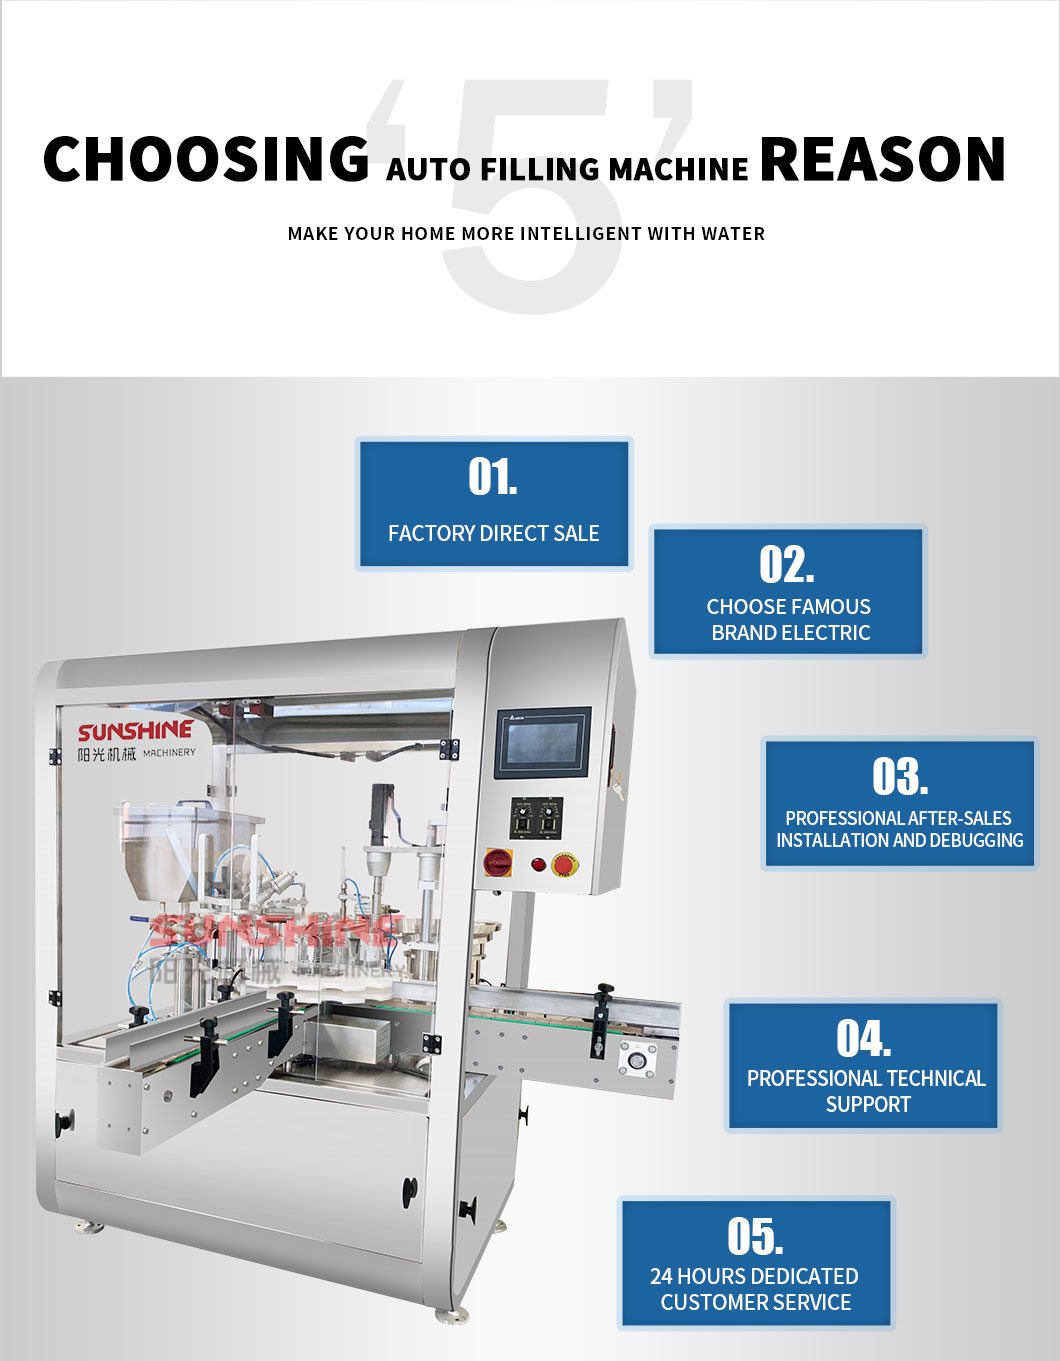 Details of the Automatic filling and capping machine